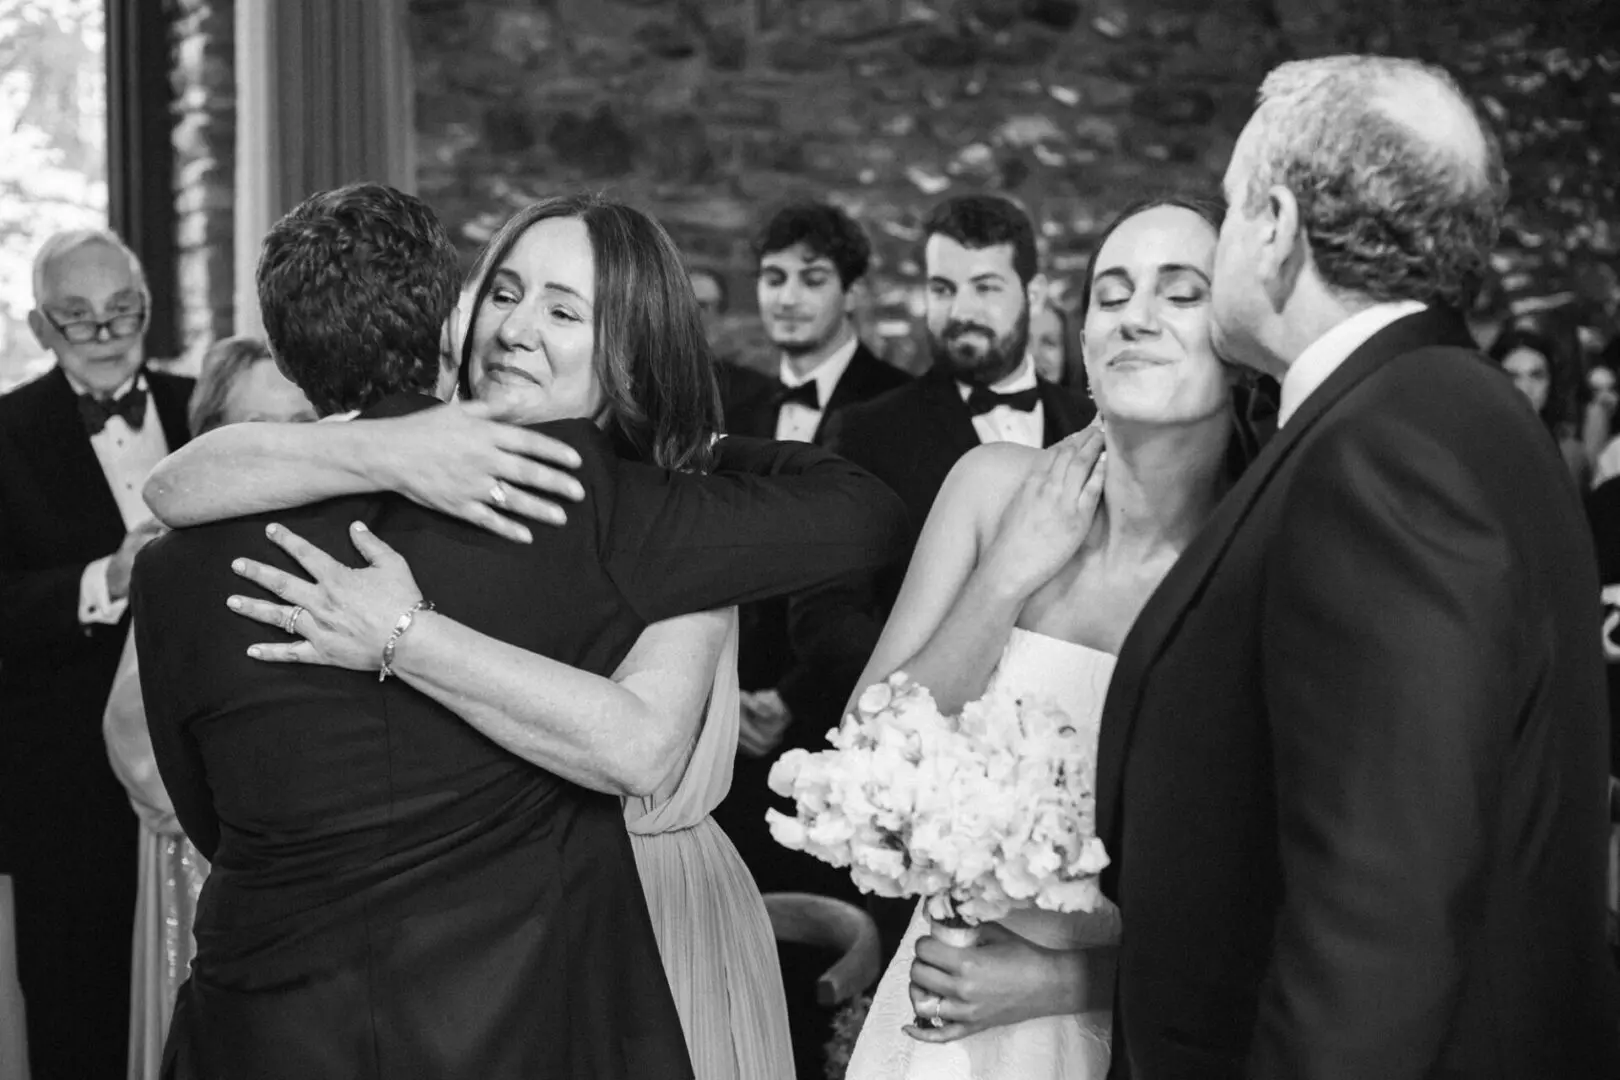 The bride and the groom embrace as parents watch